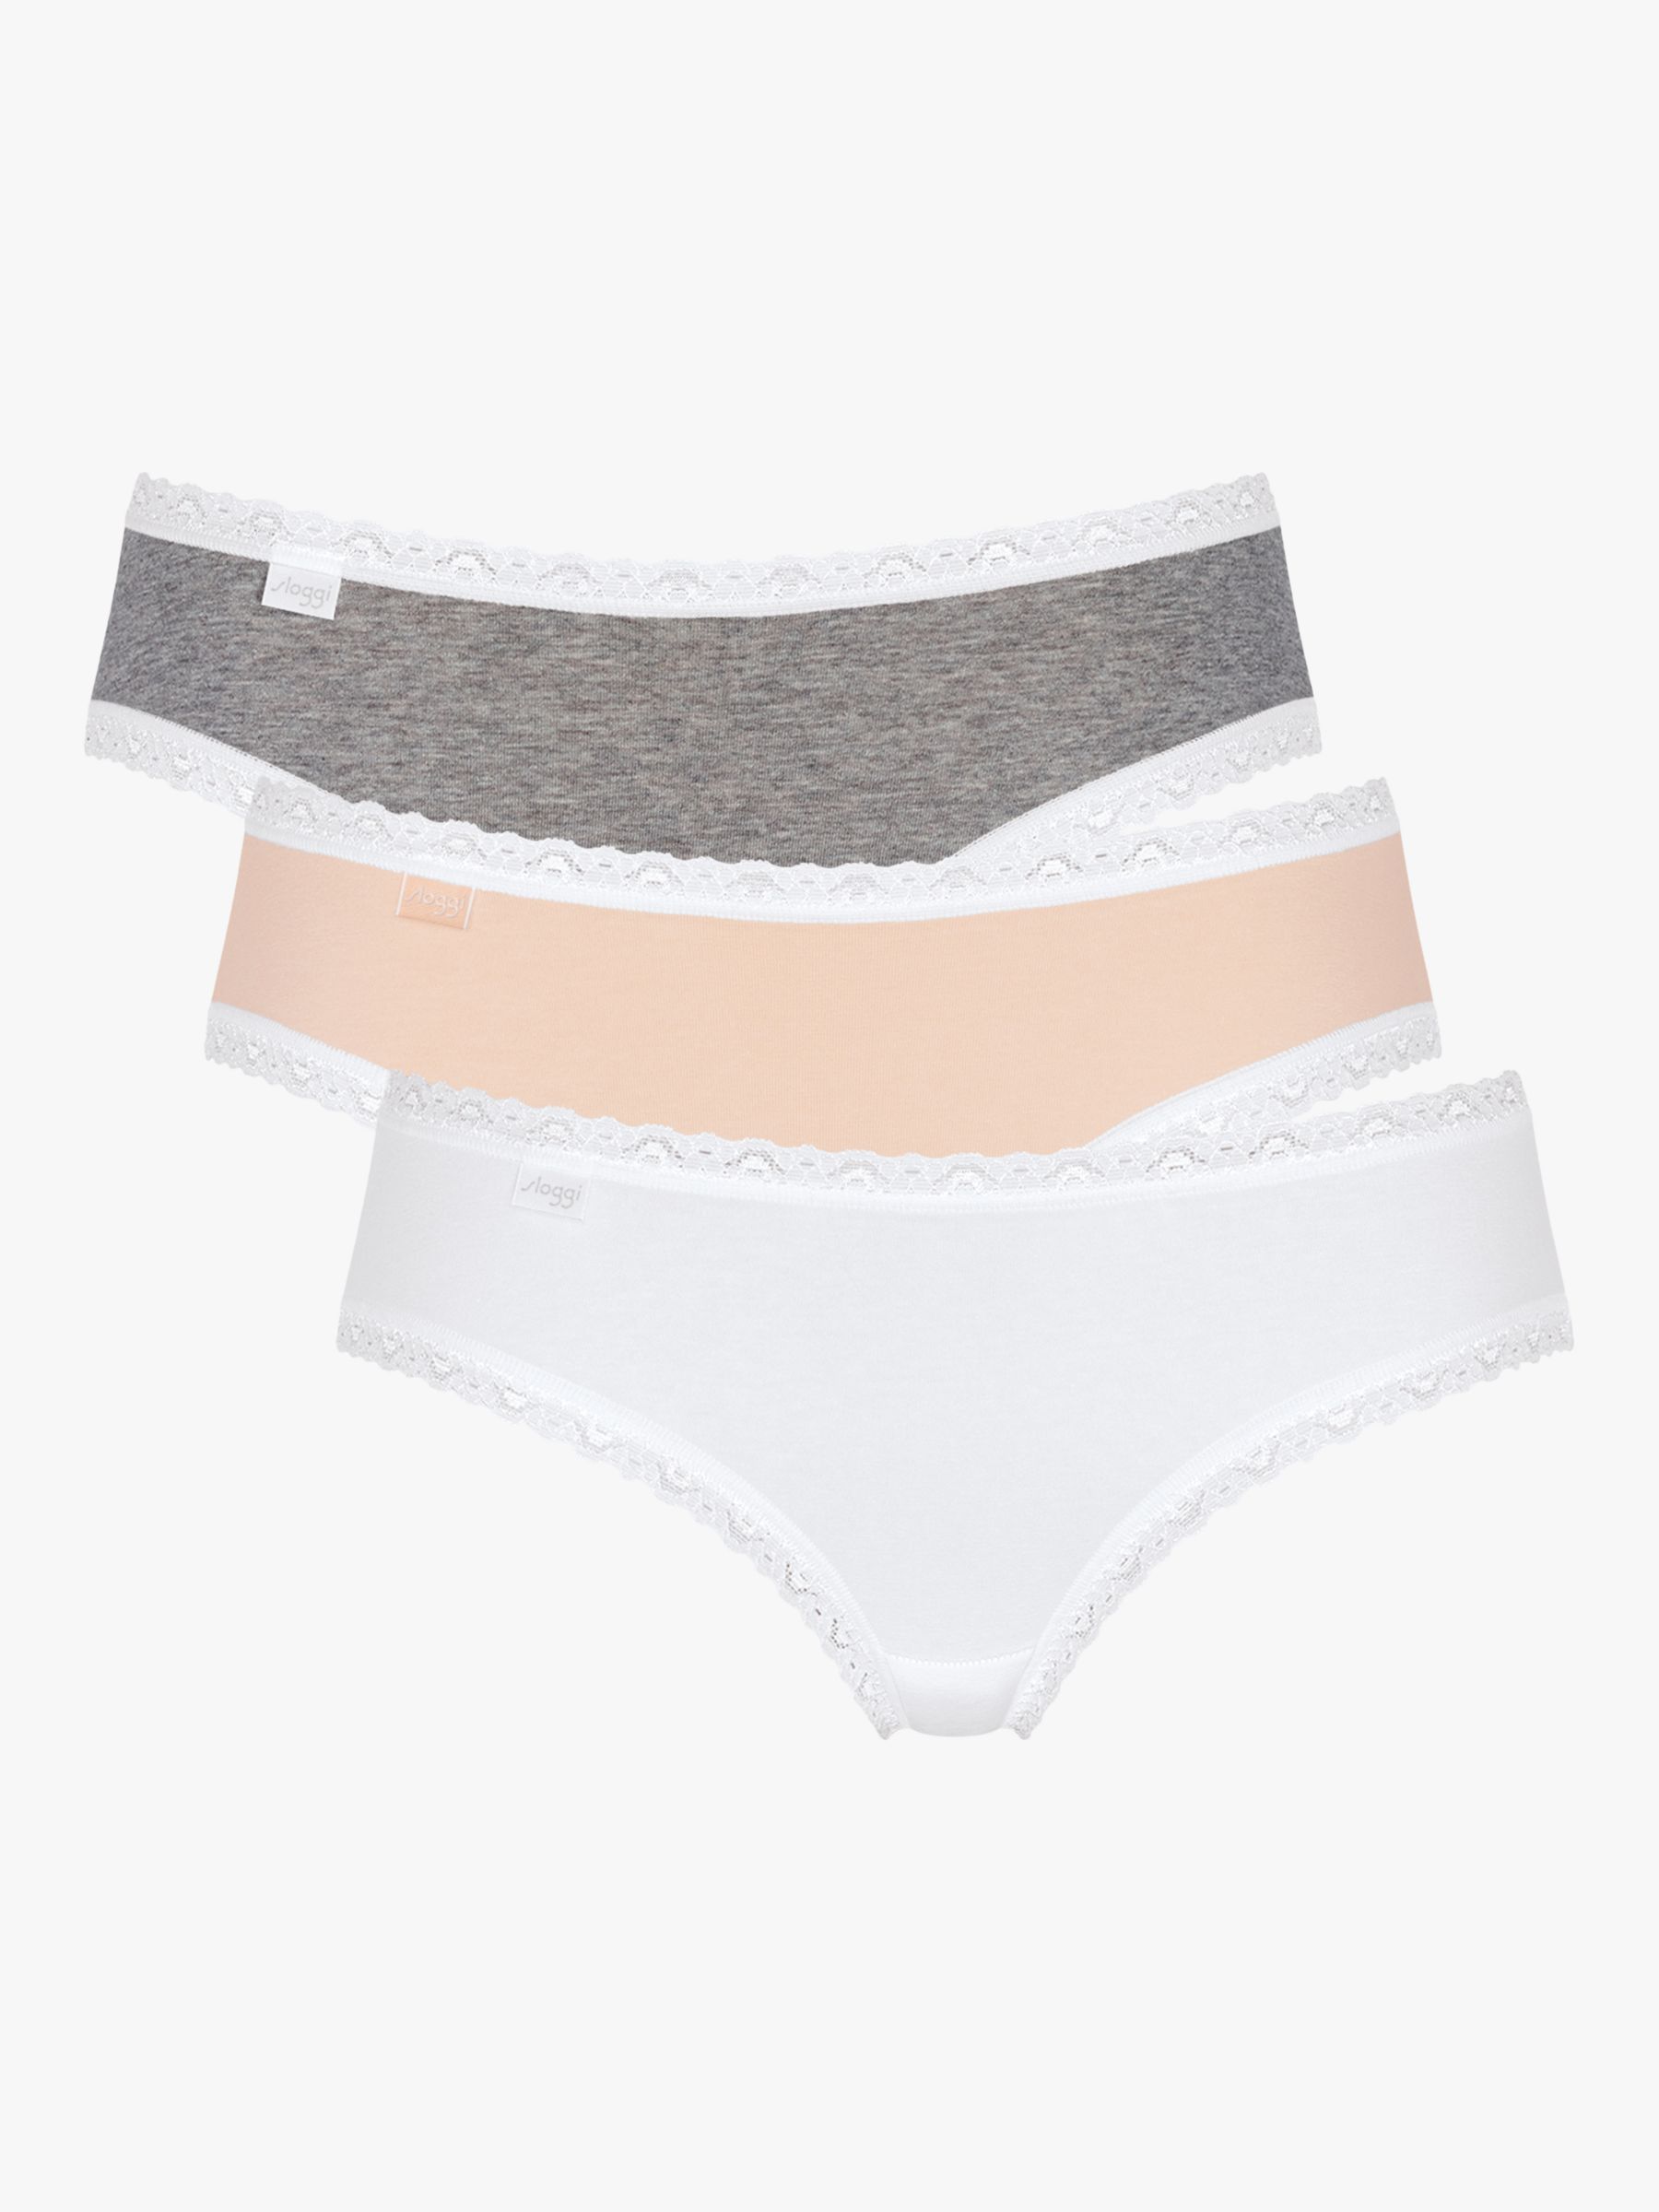 Buy Sky Vogue Women's and Men's Down Panties (Pack of 6) (White, Standard)  at